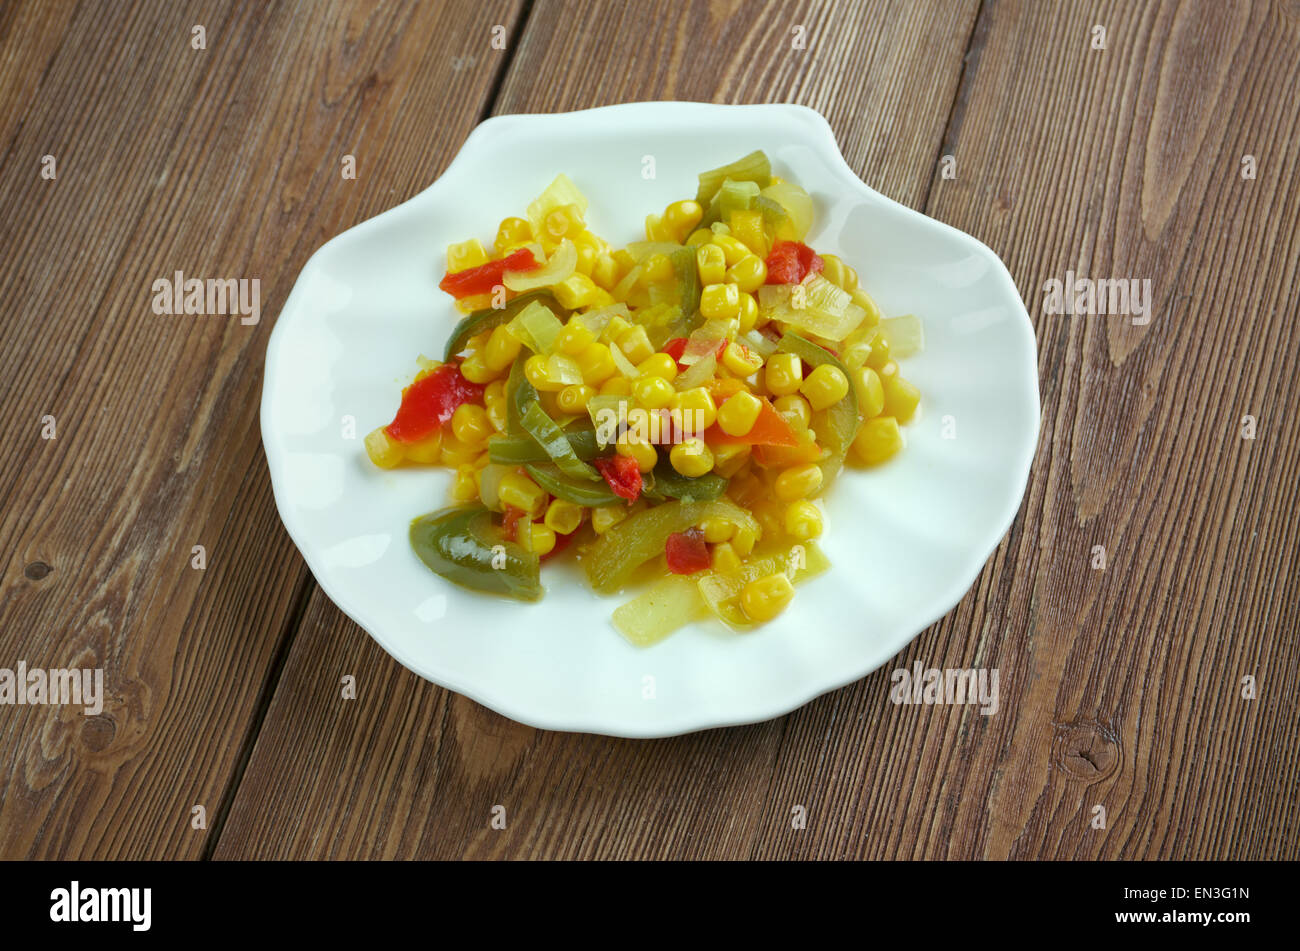 Homemade Canned Pickled Corn relish Stock Photo